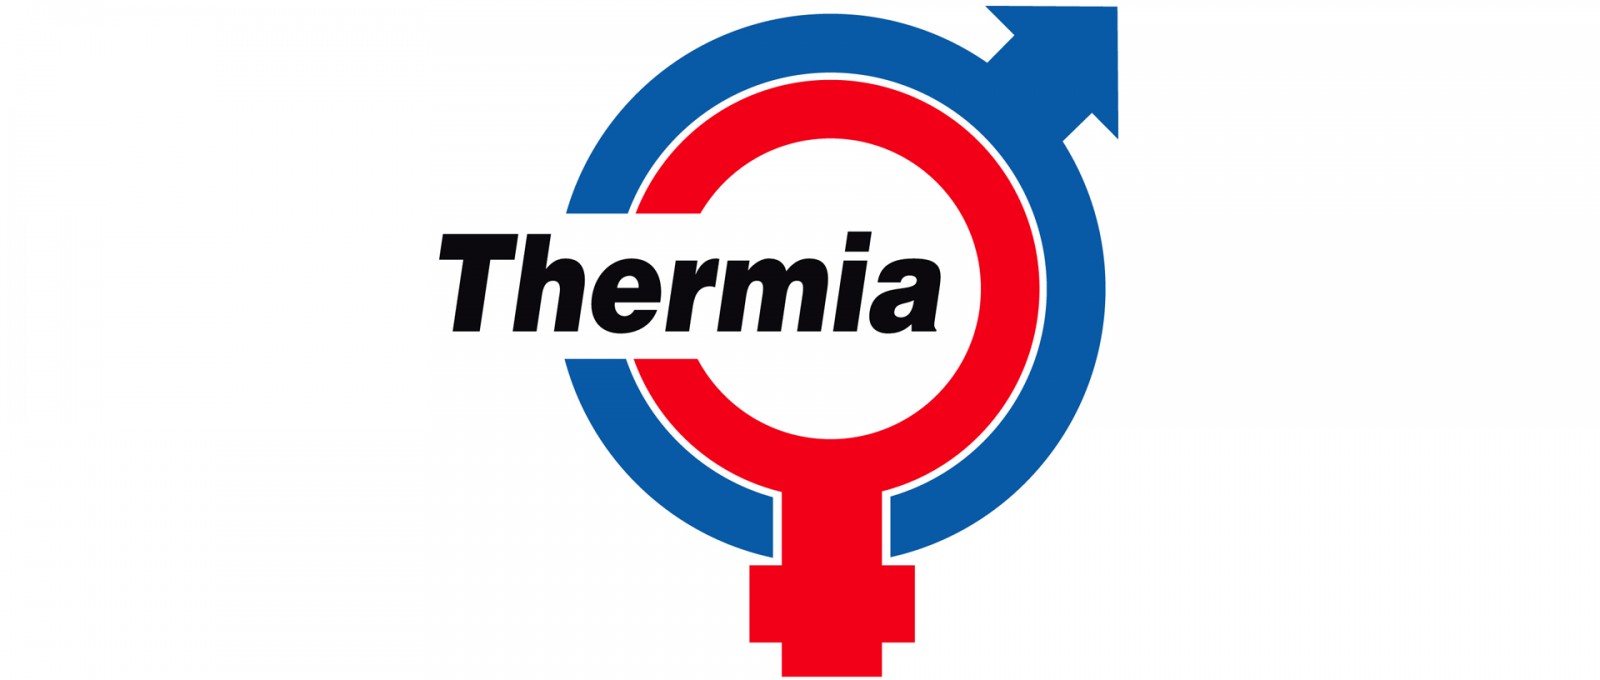 Thermia_logo_product_category.jpg